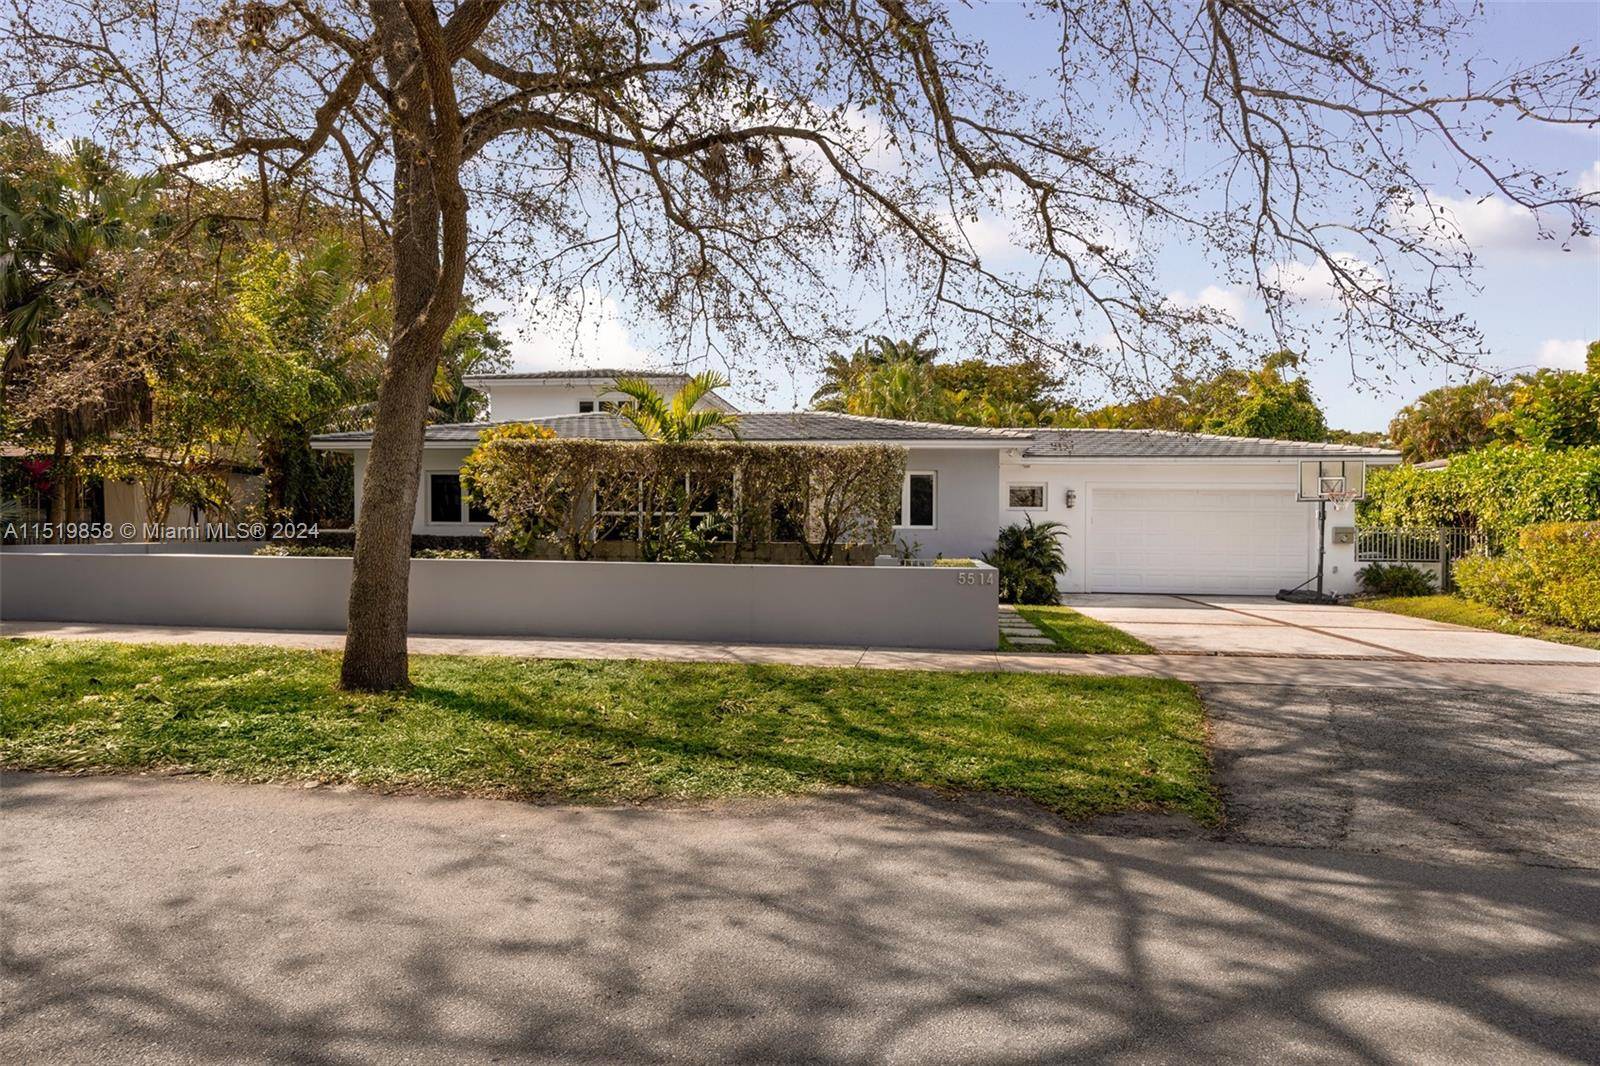 This modern mid century style home in the sought after South Coral Gables neighborhood is a true gem.